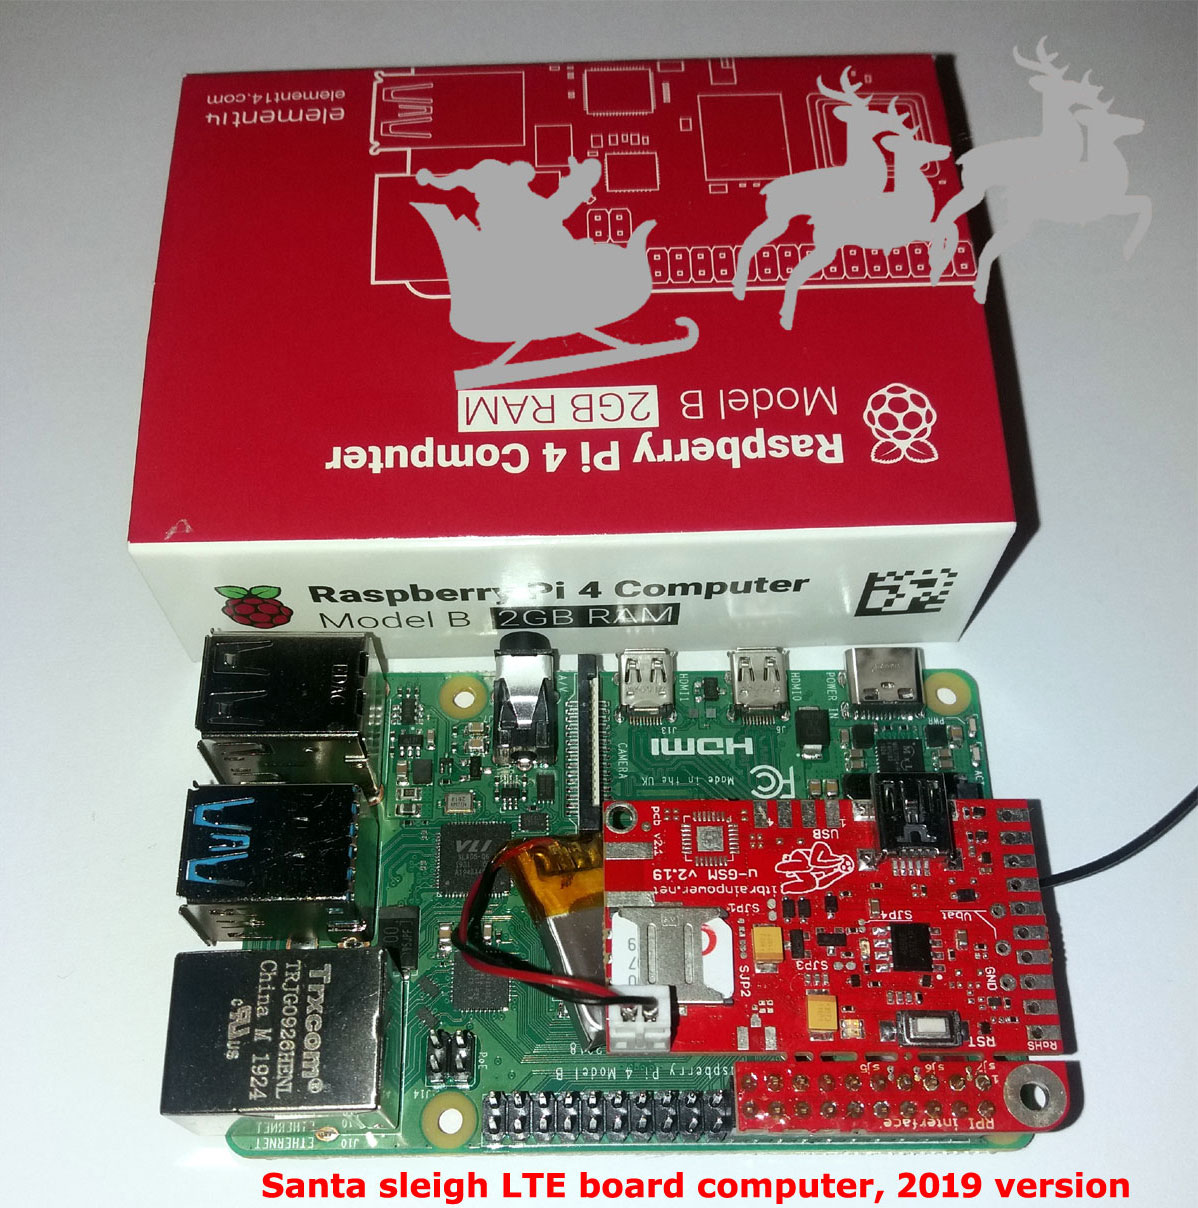 Raspberry PI 4 with high speed LTE u-GSM modem equipped with EG95